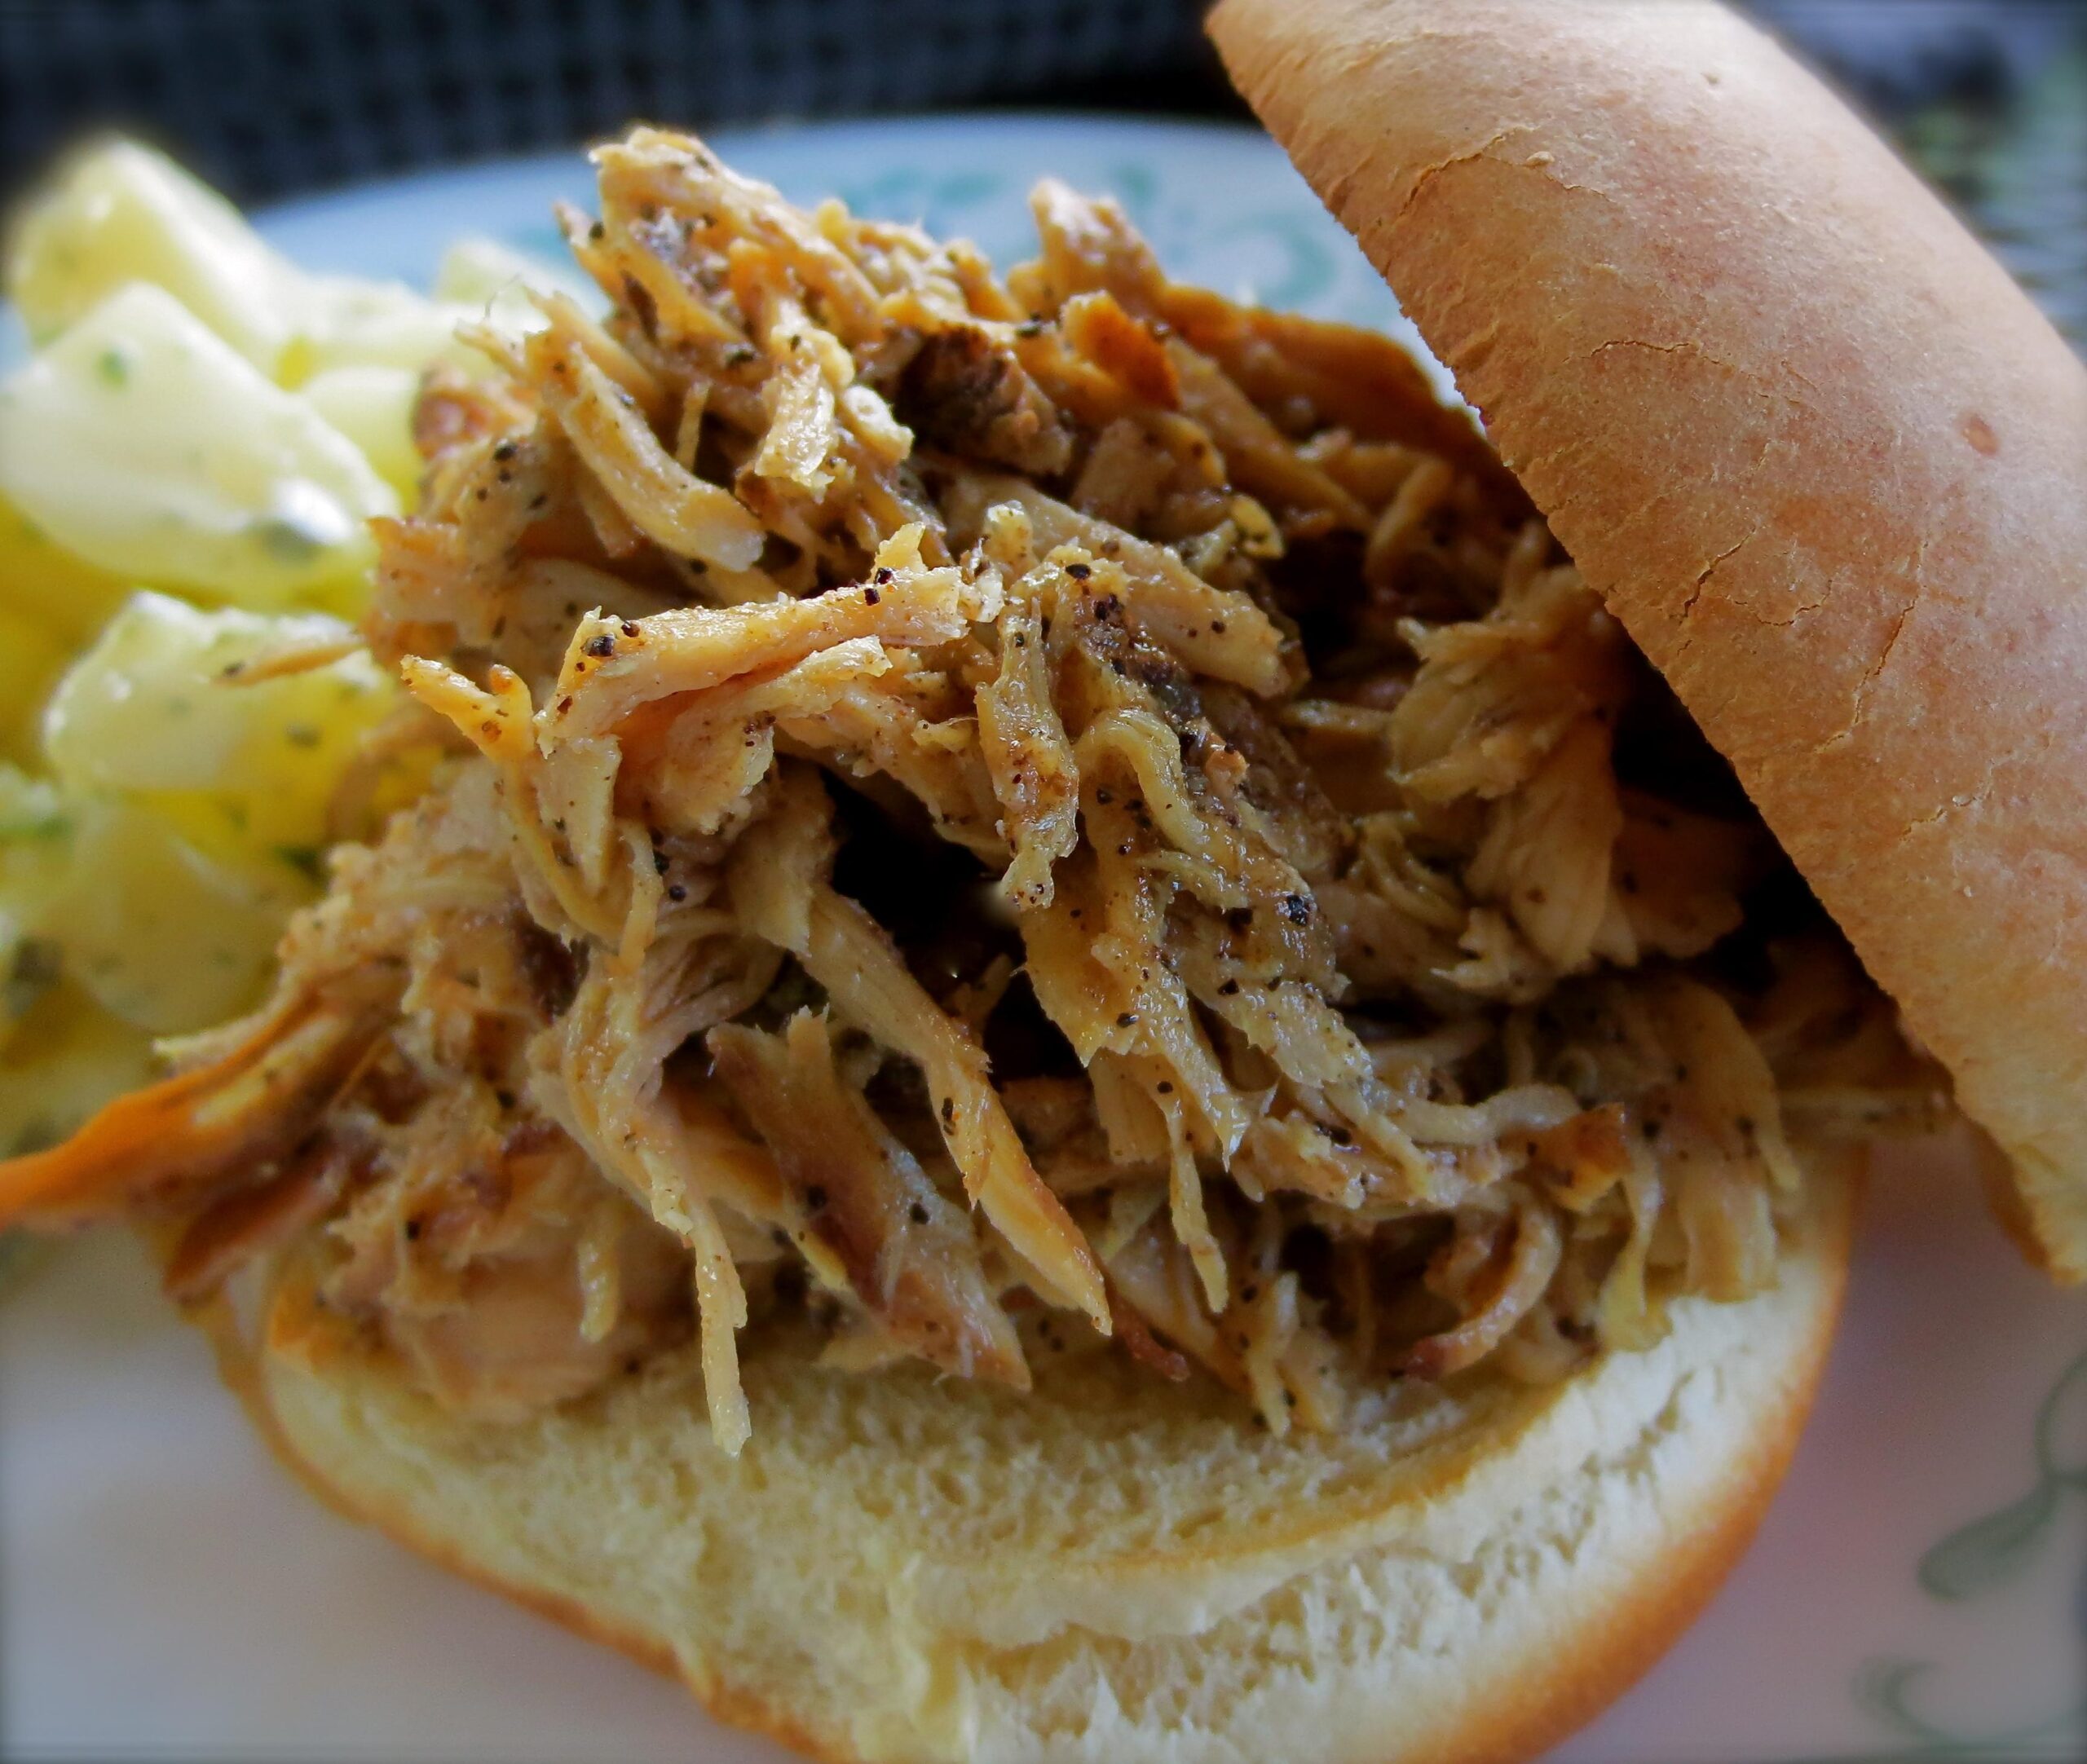  Every bite of this pulled pork is a celebration of spices and soulful flavors.